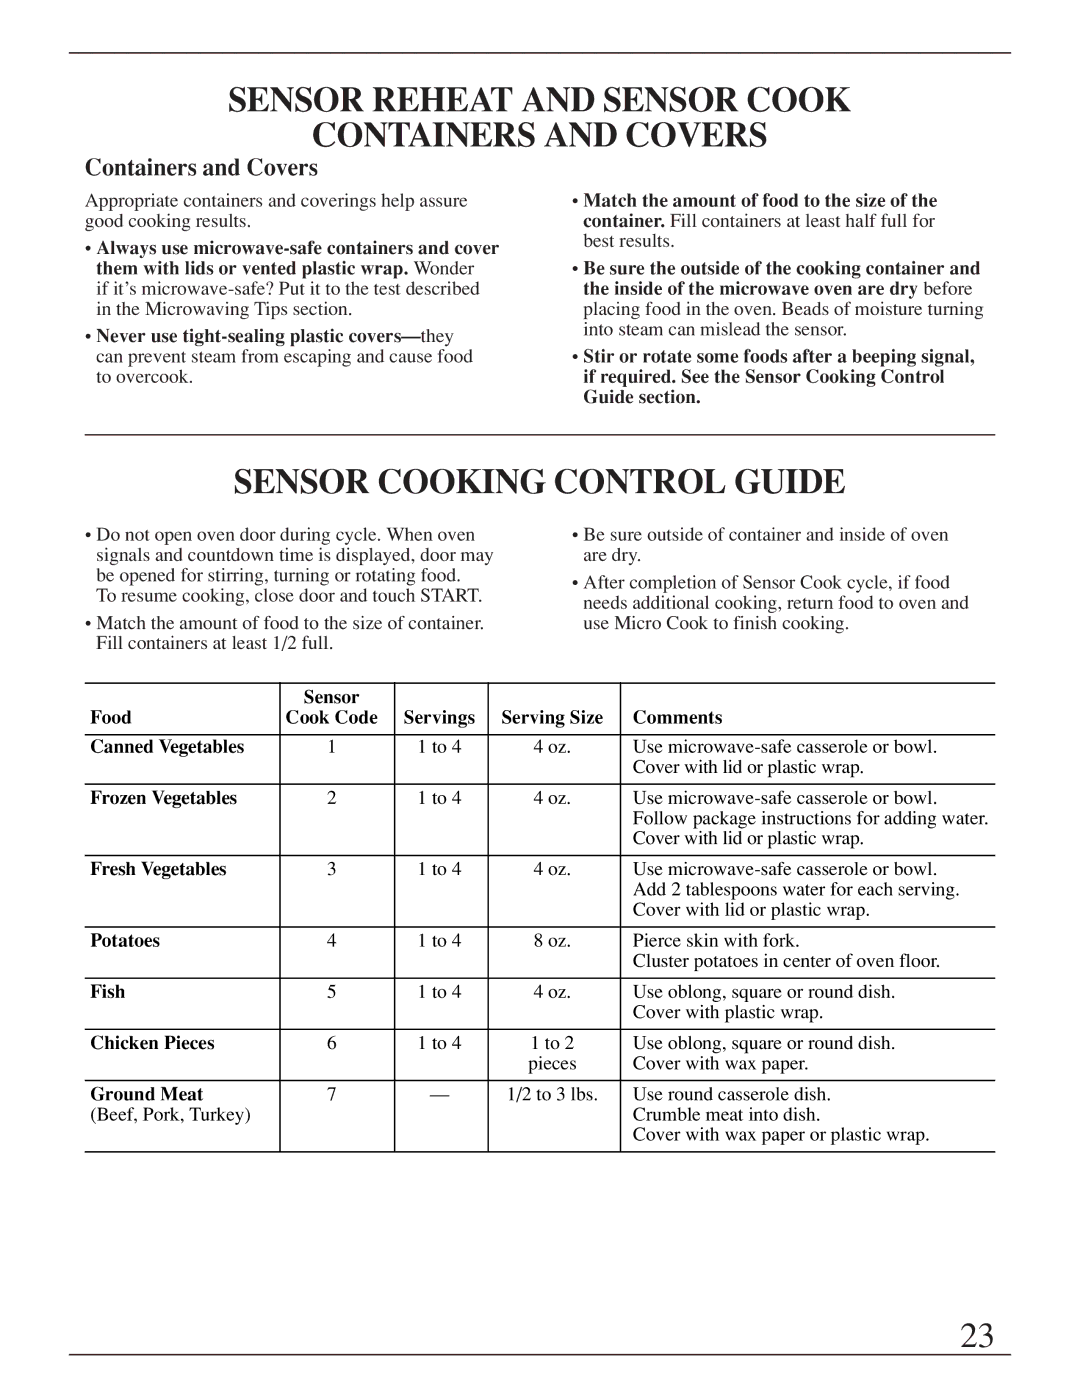 GE ZMC1095 owner manual Sensor Reheat and Sensor Cook Containers and Covers, Sensor Cooking Control Guide 